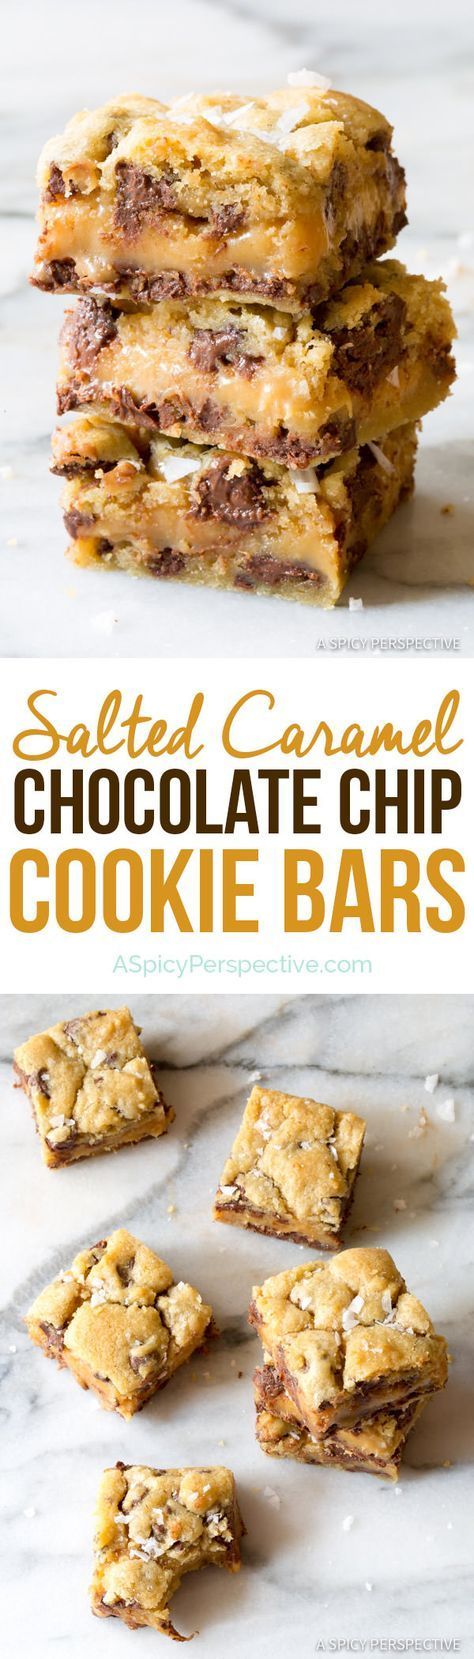 Irresistible Gooey Salted Caramel Chocolate Chip Cookie Bars | a href=”http://ASpicyPerspective.com” rel=”nofollow”